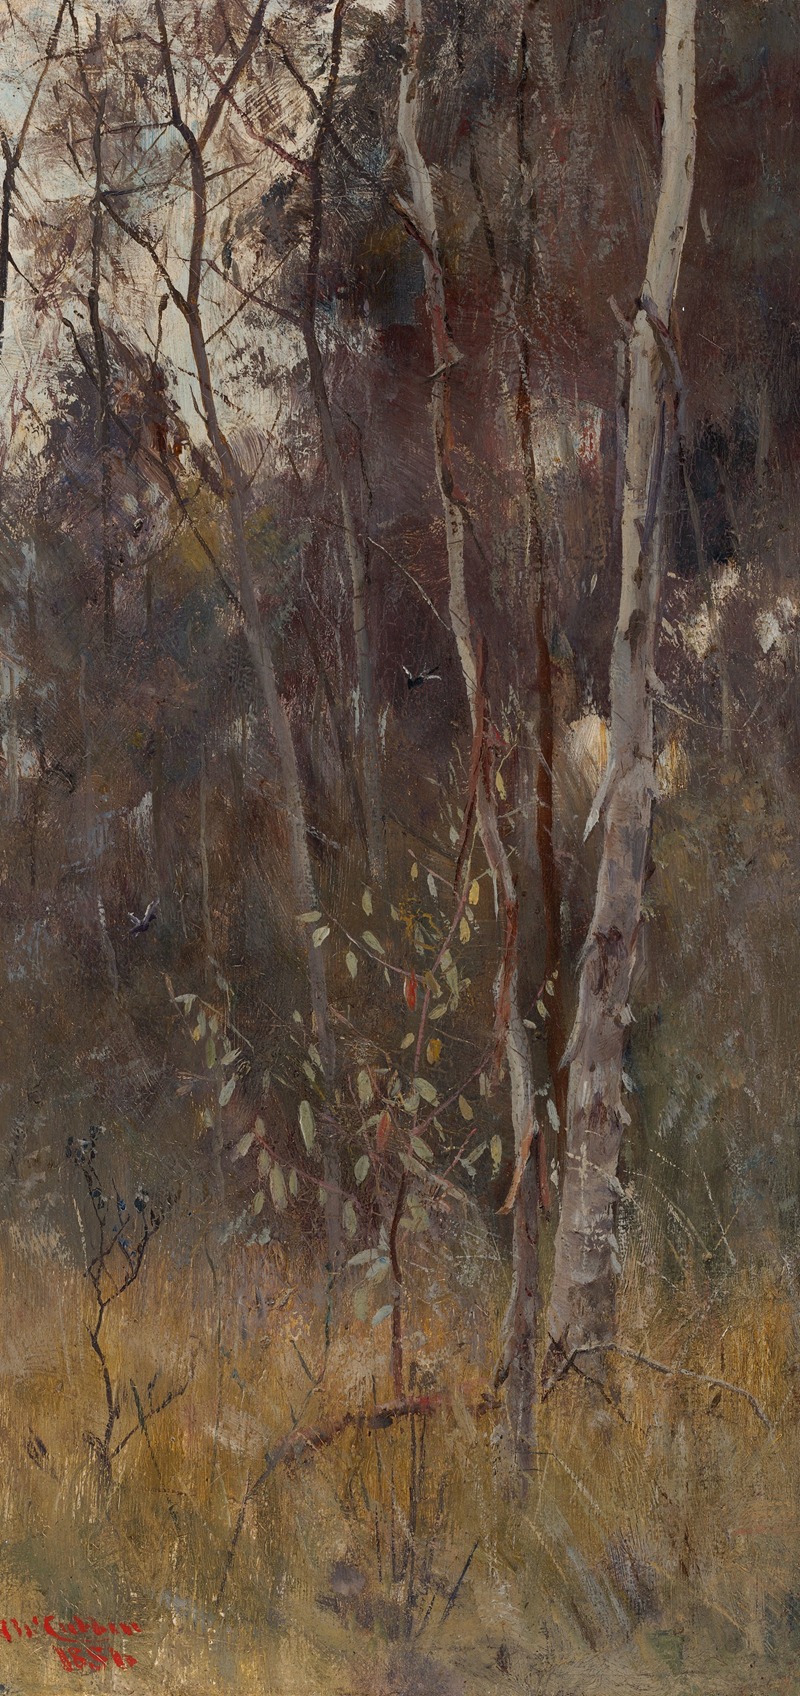 Frederick McCubbin - At the falling of the year